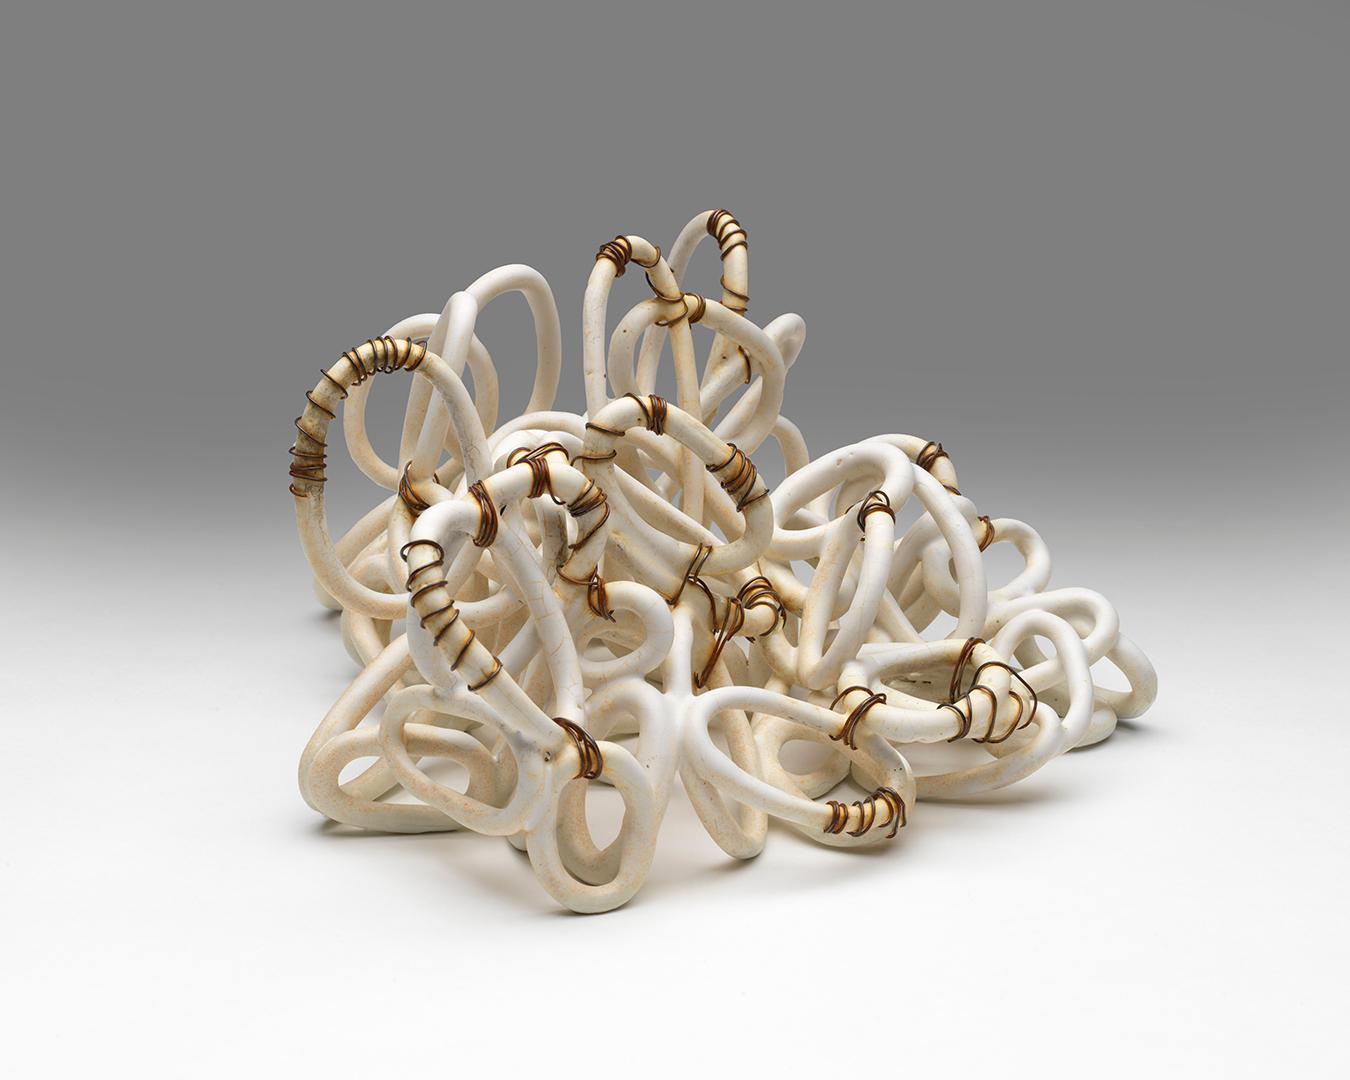 Louise Pappageorge Abstract Sculpture - TANGLE